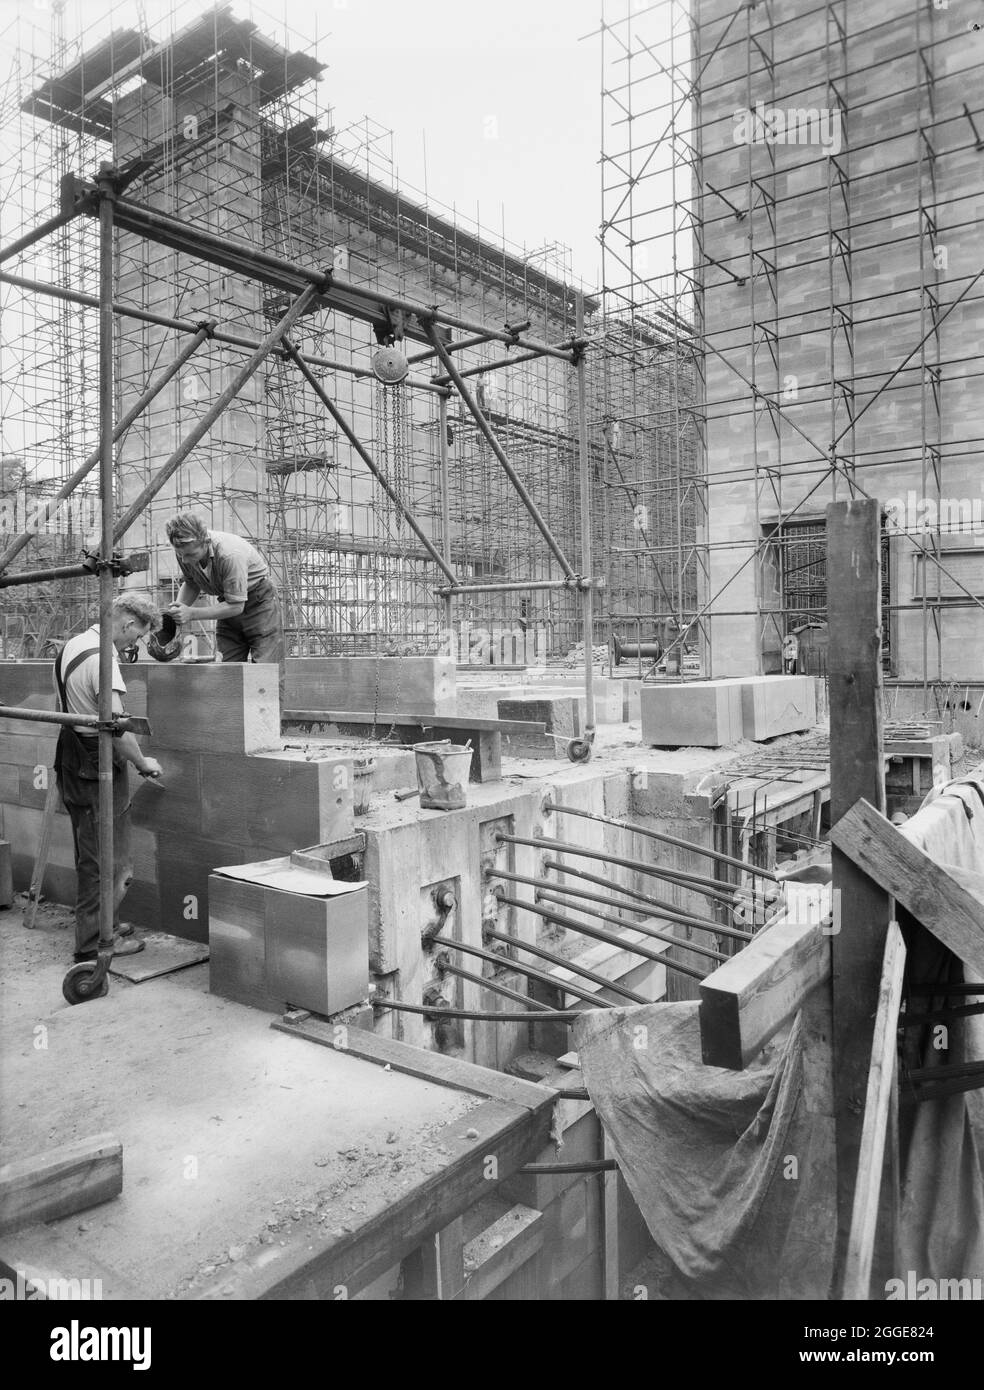 A view of the construction site at Coventry Cathedral, showing two builders constructing a wall in the foreground and scaffolding erected around the shell of the building in the background. This image was catalogued as part of the Breaking New Ground Project in partnership with the John Laing Charitable Trust in 2019-20. Stock Photo